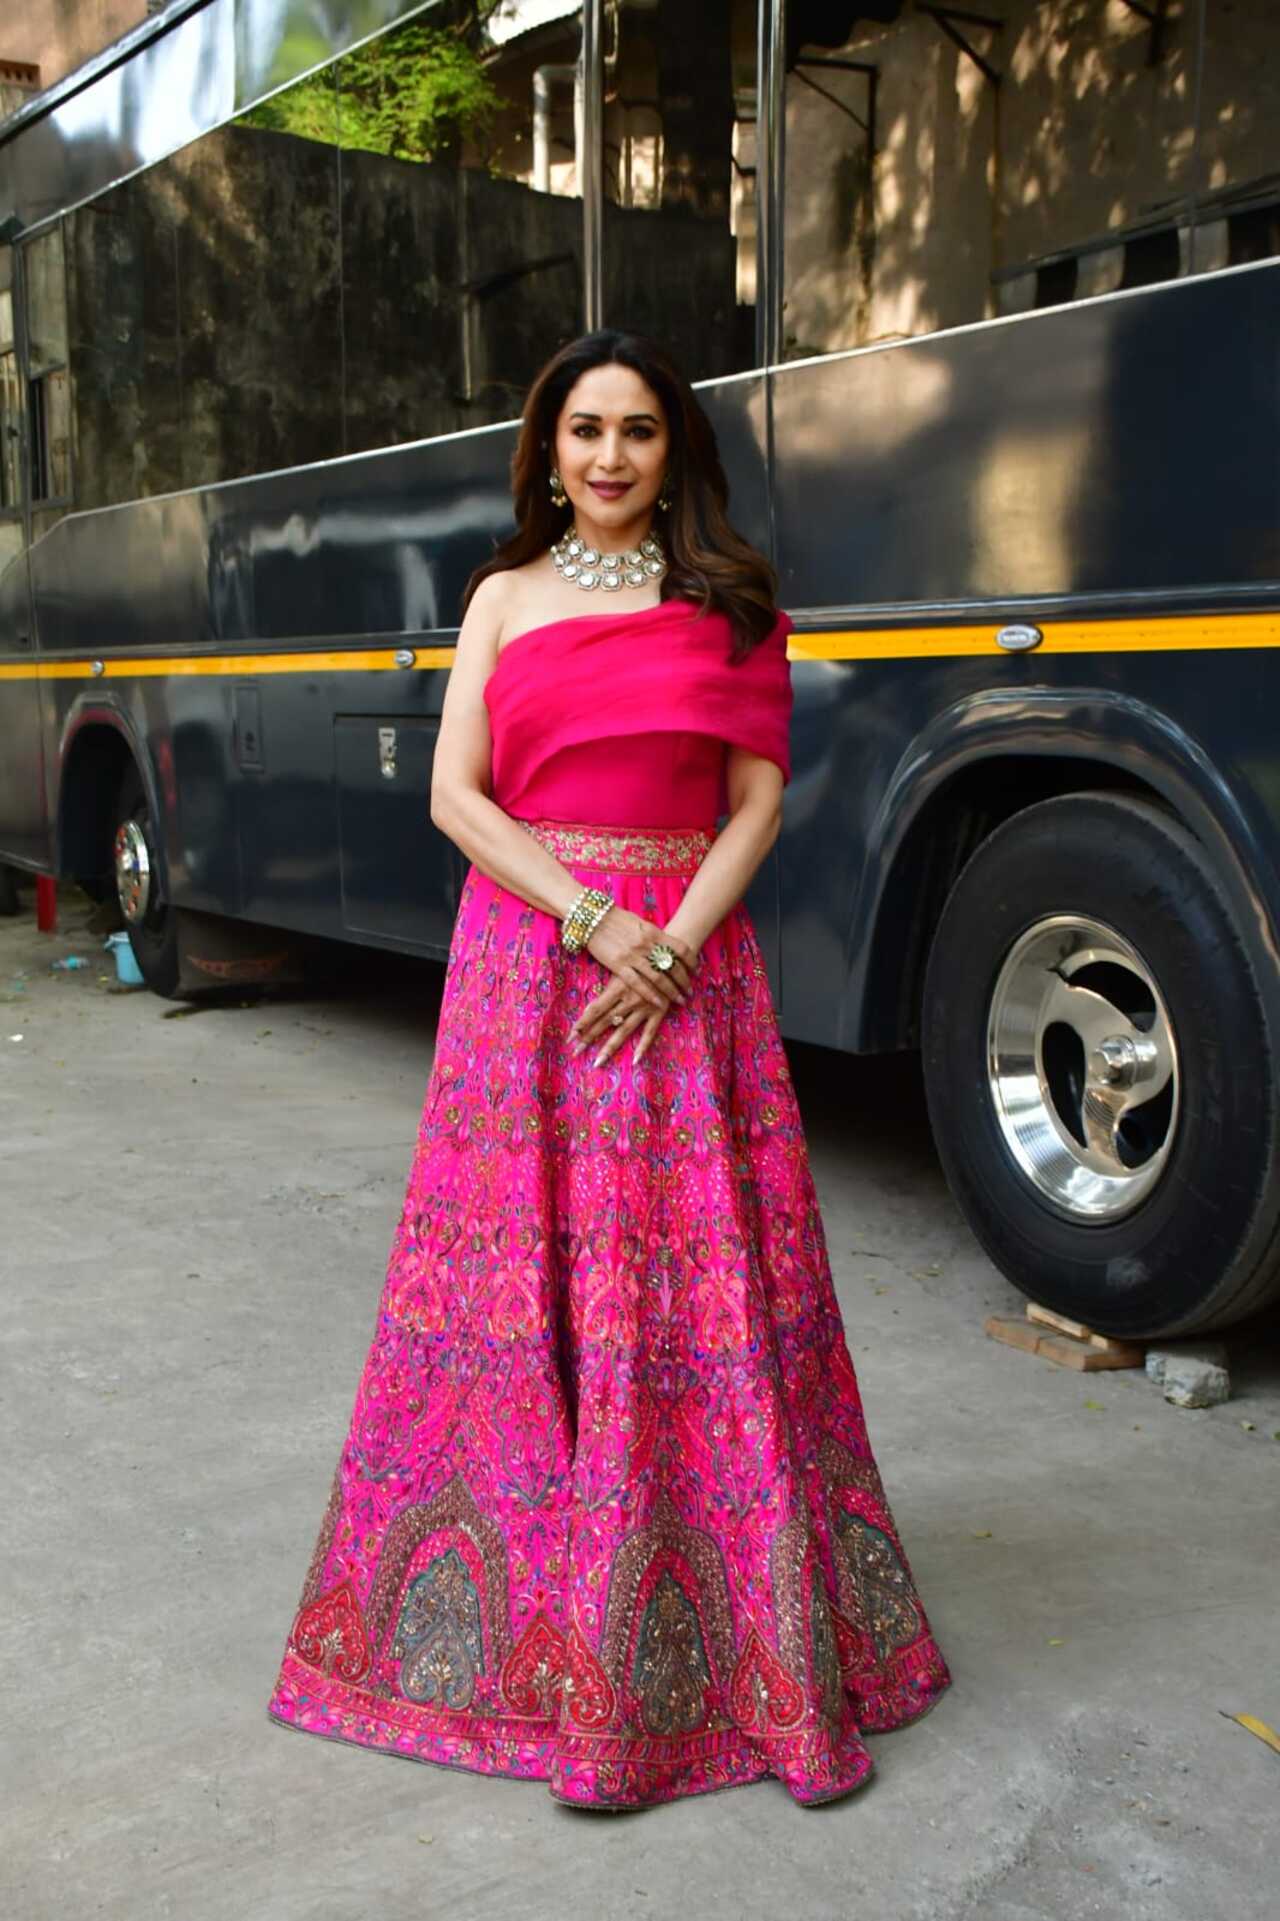 Madhuri Dixit Nene looked bespoke in a hot pink Indian ensemble on the sets of ‘Dance Deewane 4’.